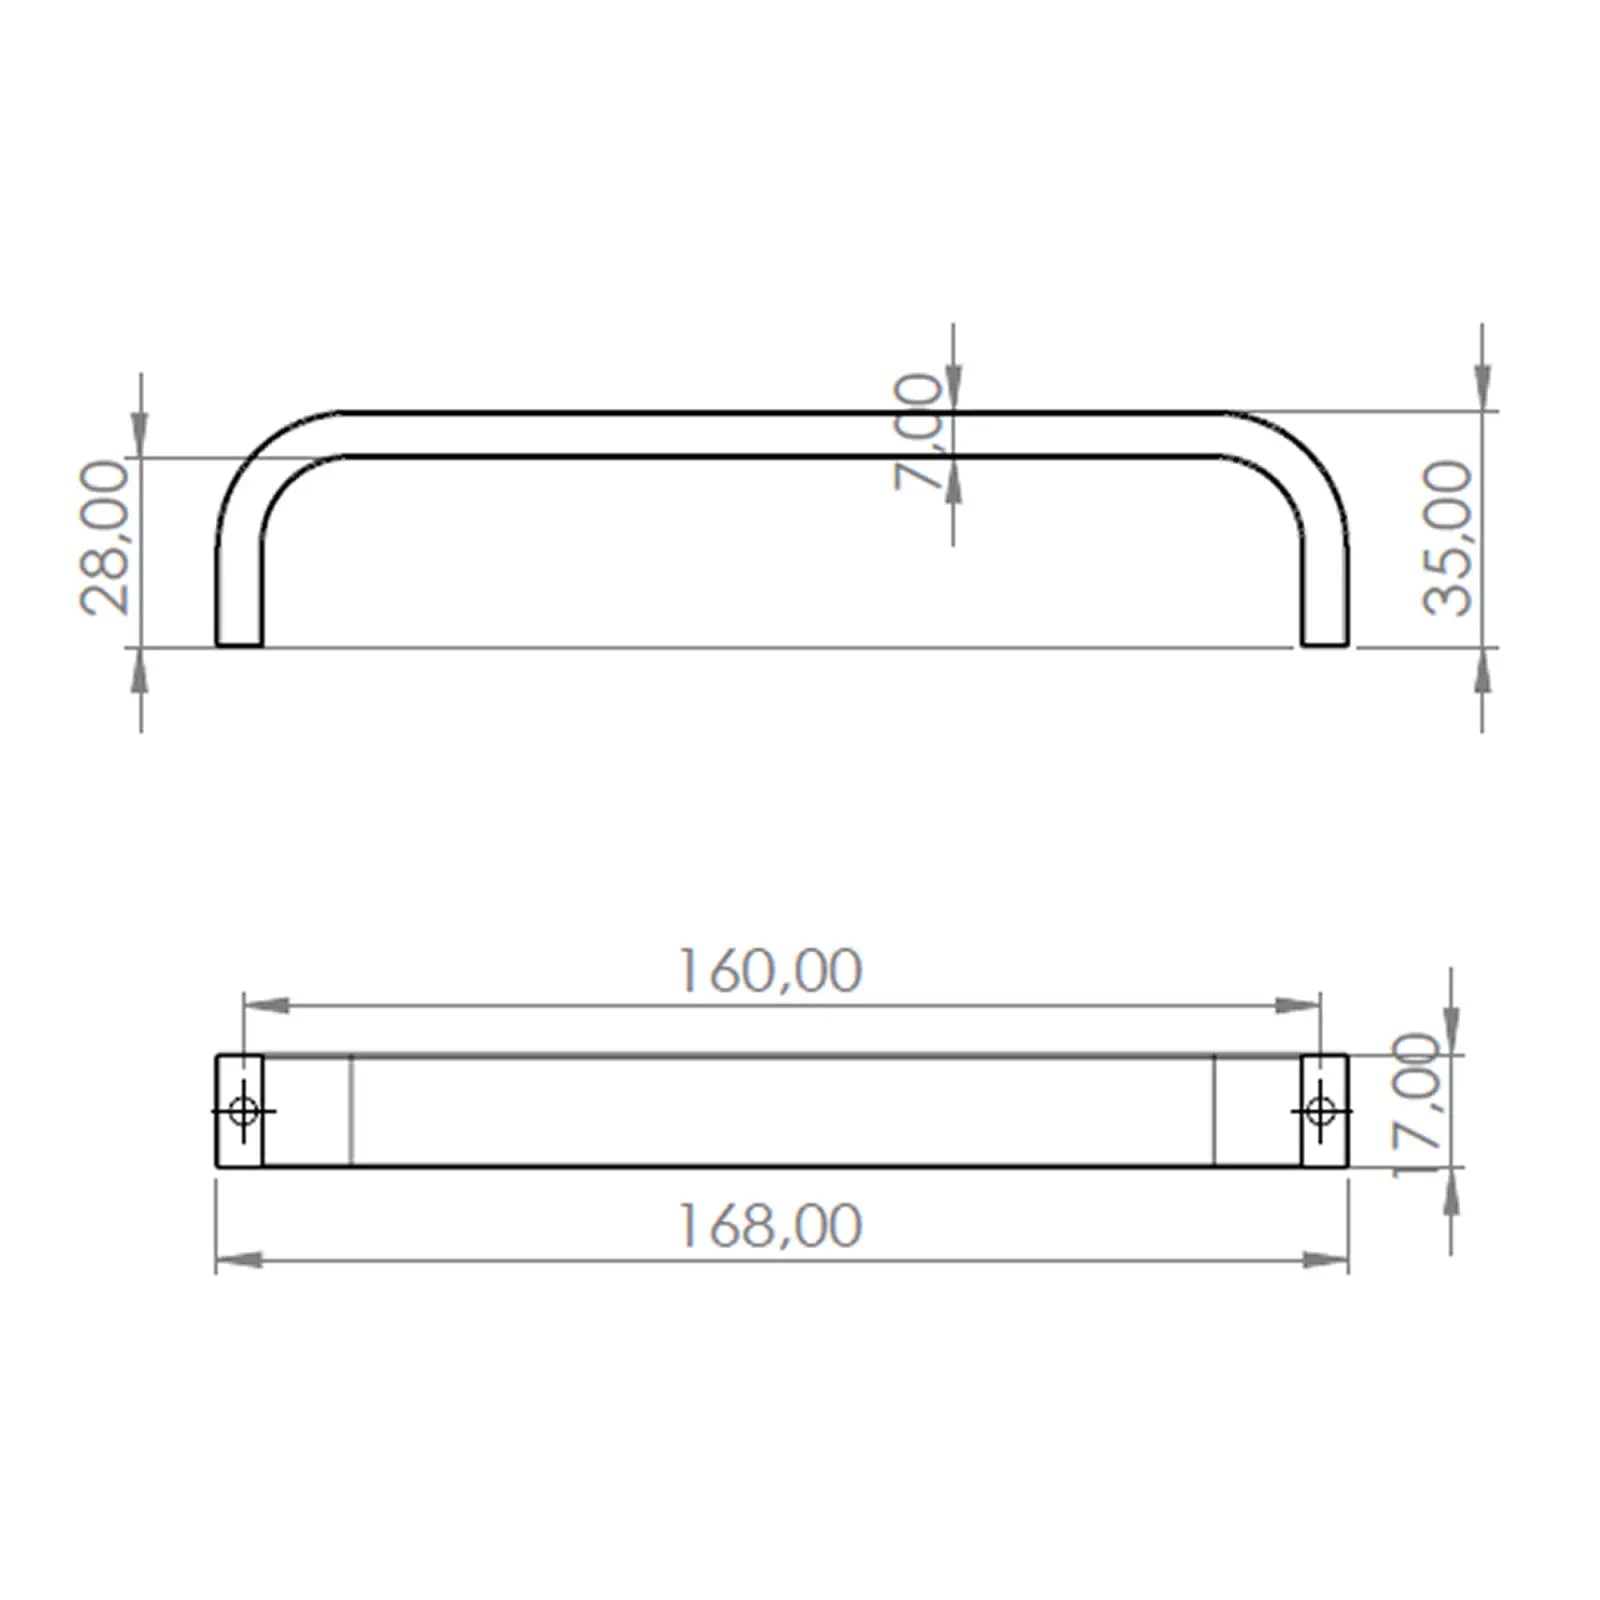 #size selection_160mm hole centres